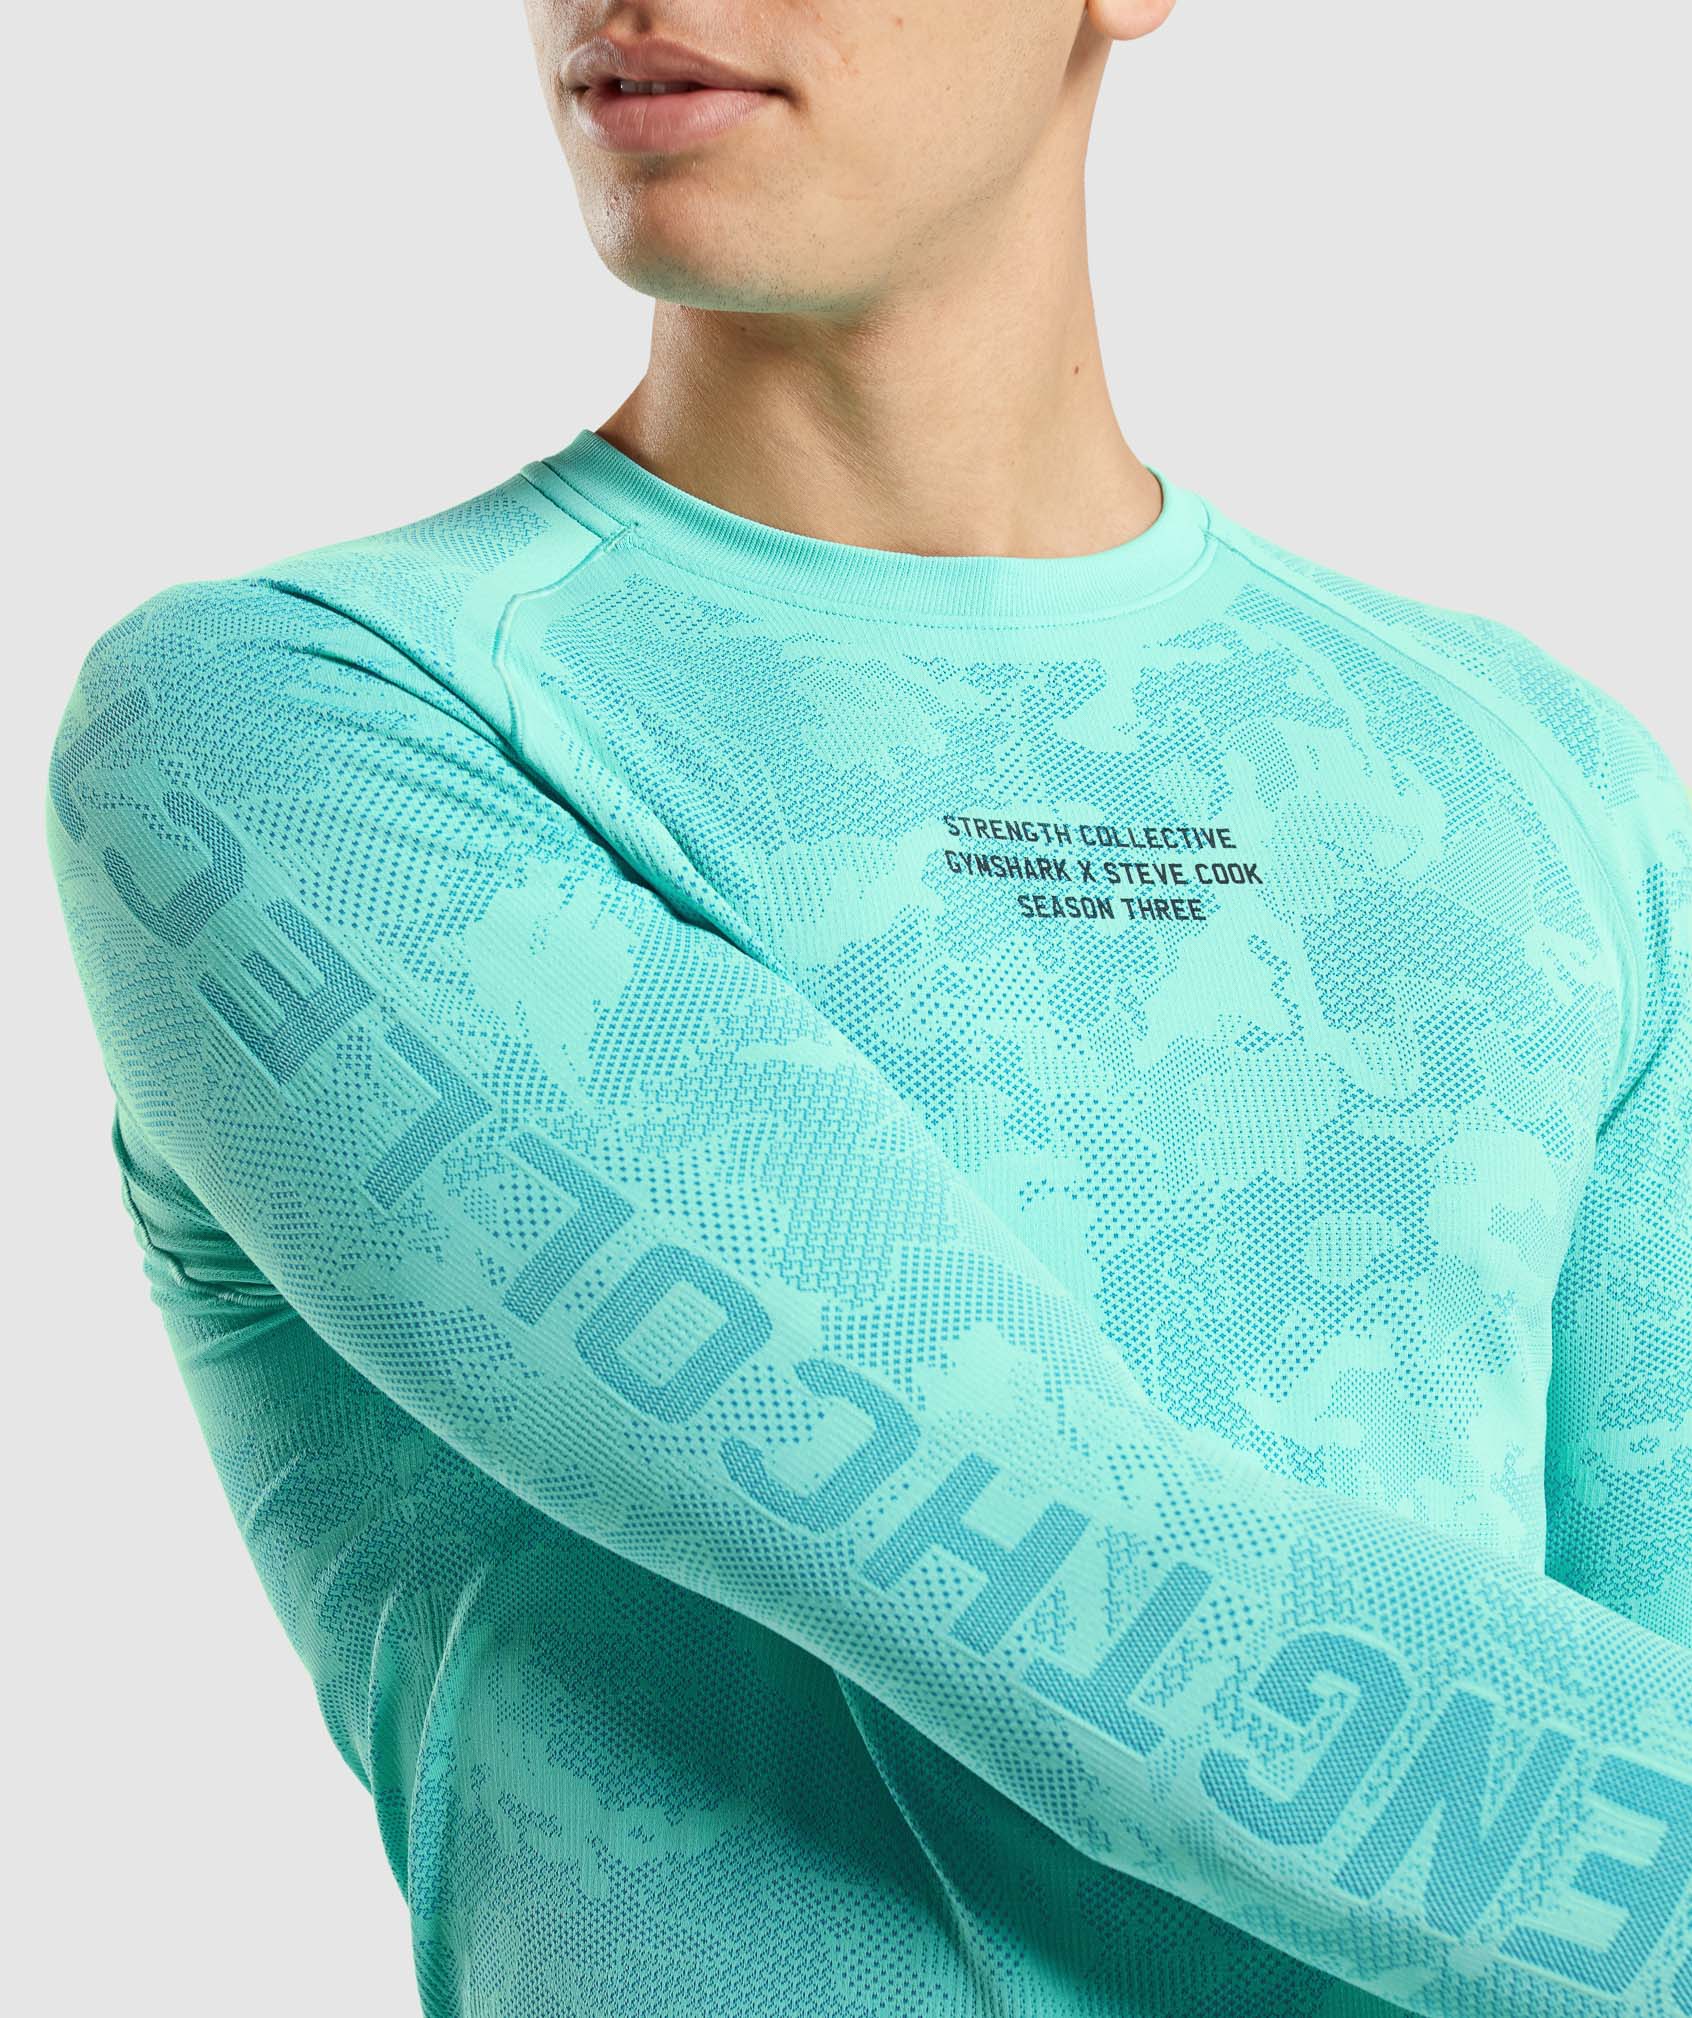 Gymshark//Steve Cook Long Sleeve Seamless T-Shirt in Bright Turquoise/Atlas Blue - view 6